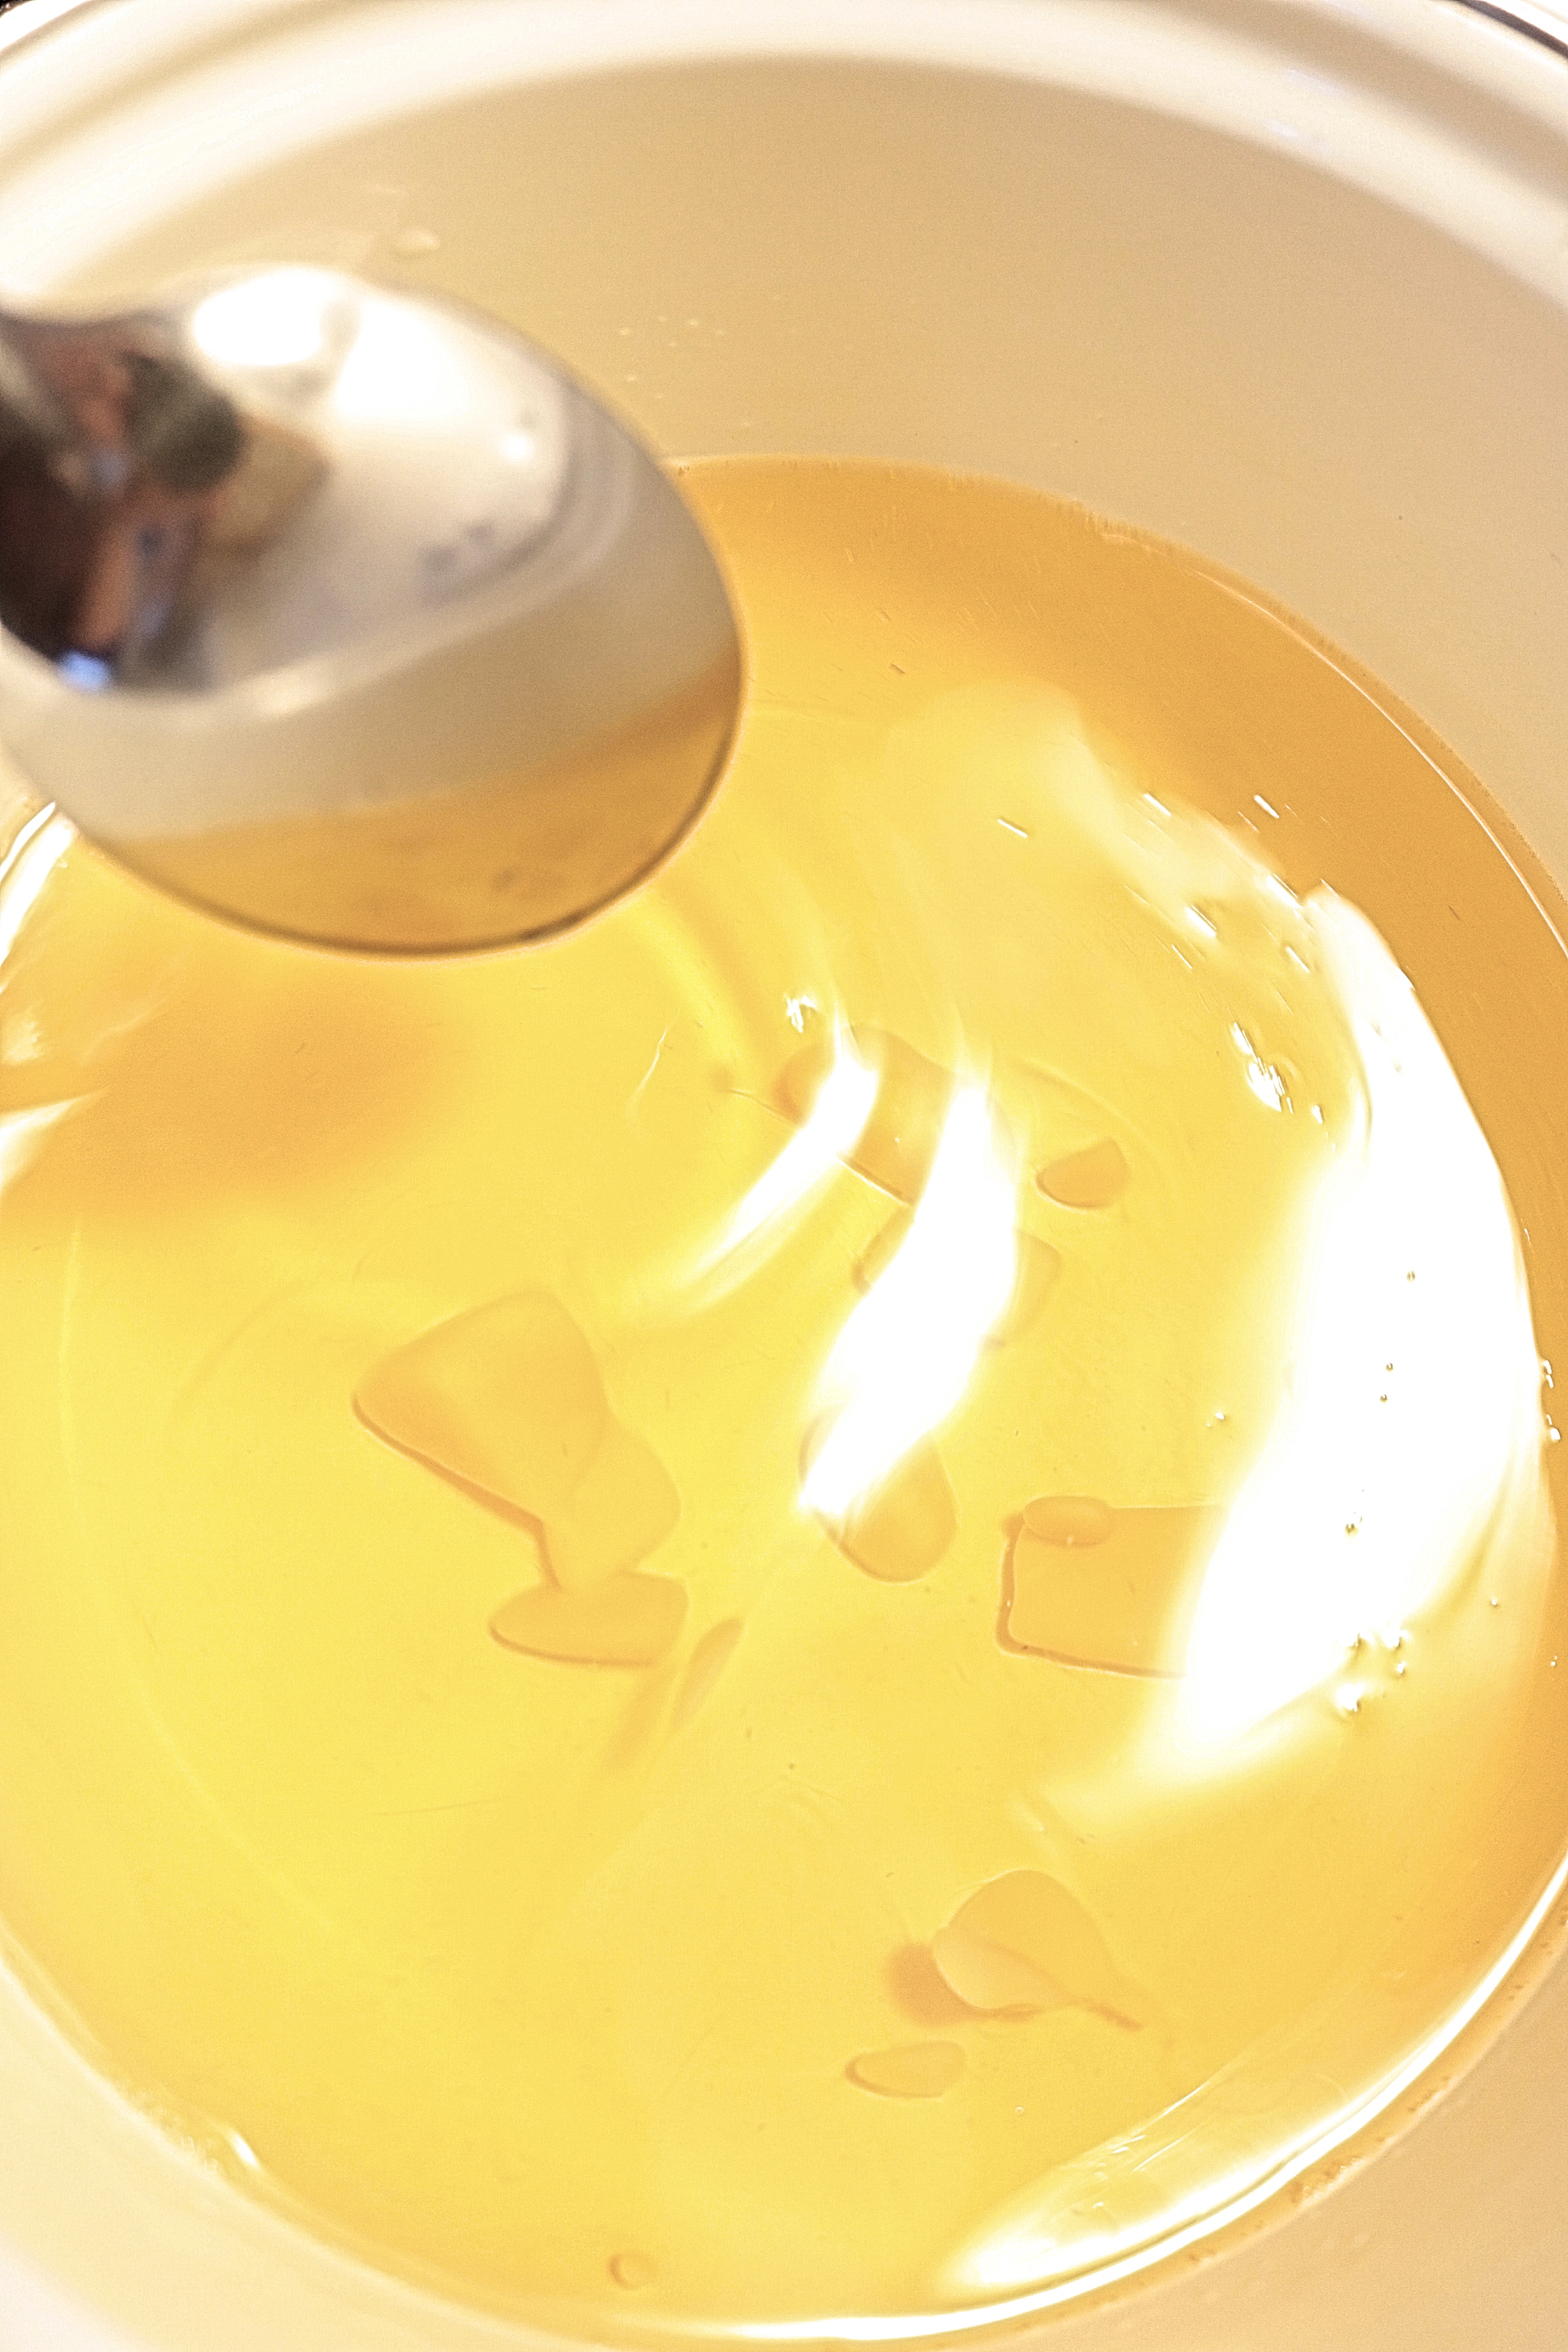 Melt beeswax in oil is one of the steps in making a miracle salve.